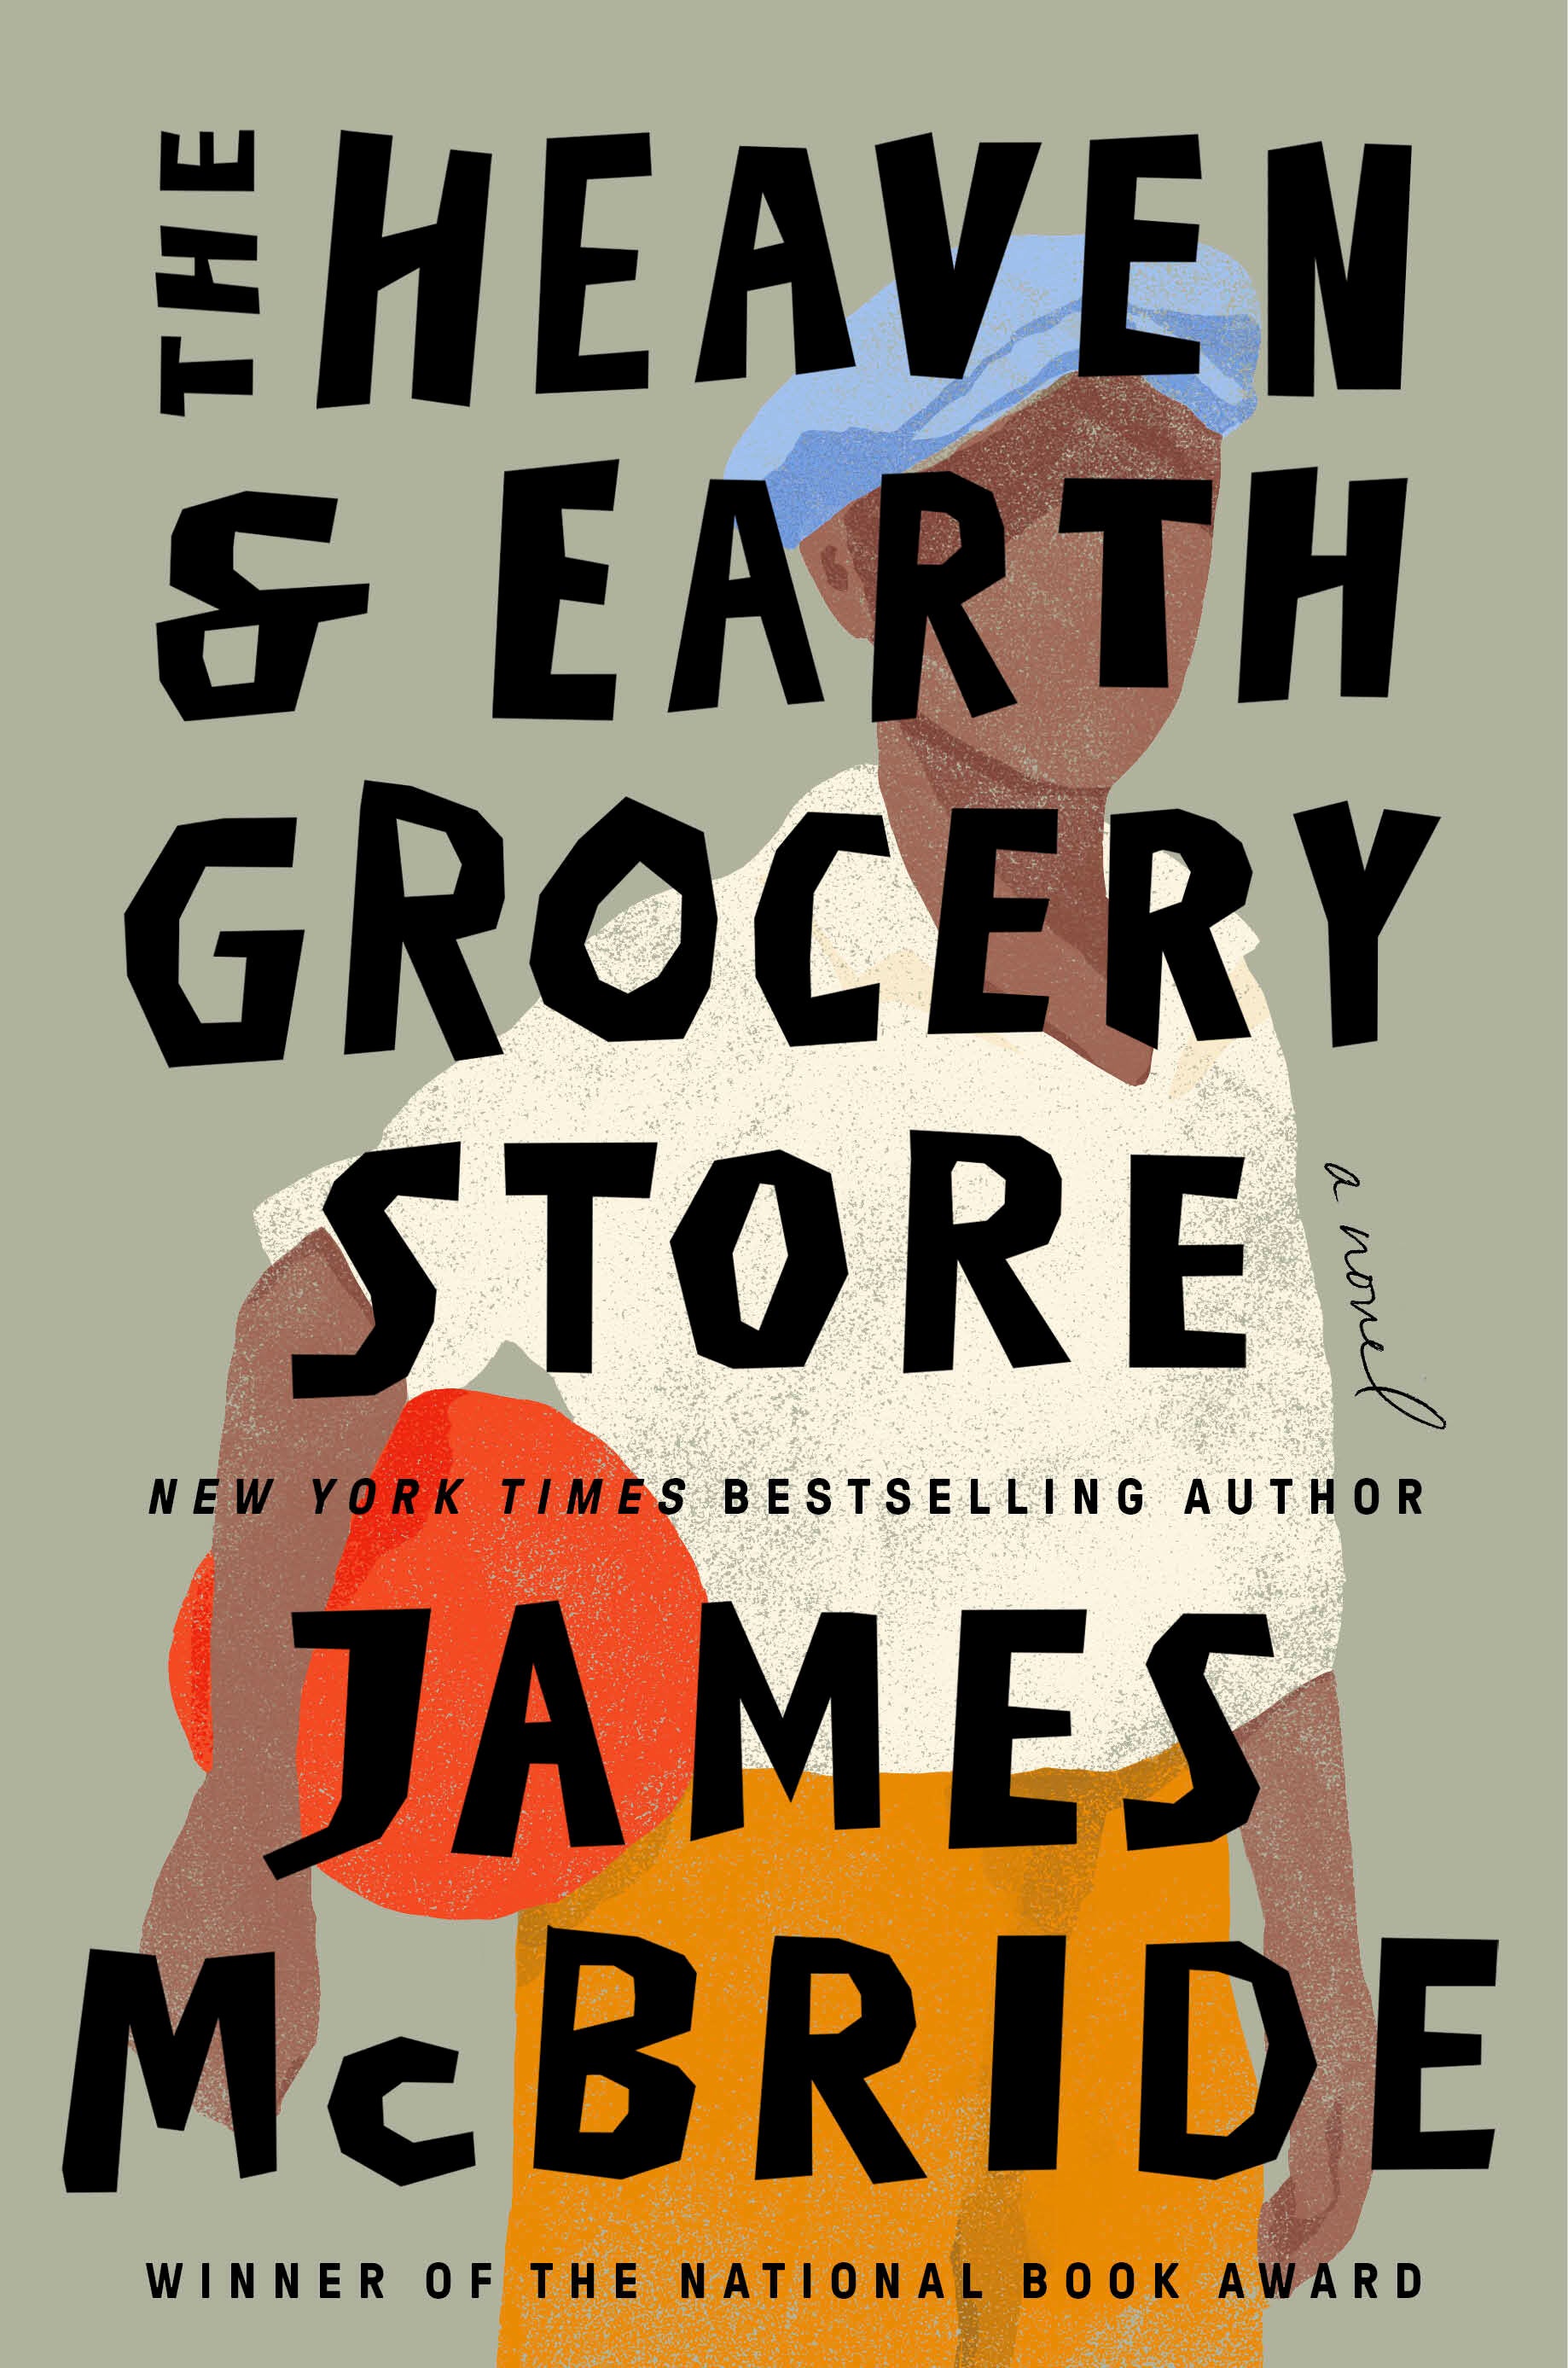 Book Review - The Heaven & Earth Grocery Store